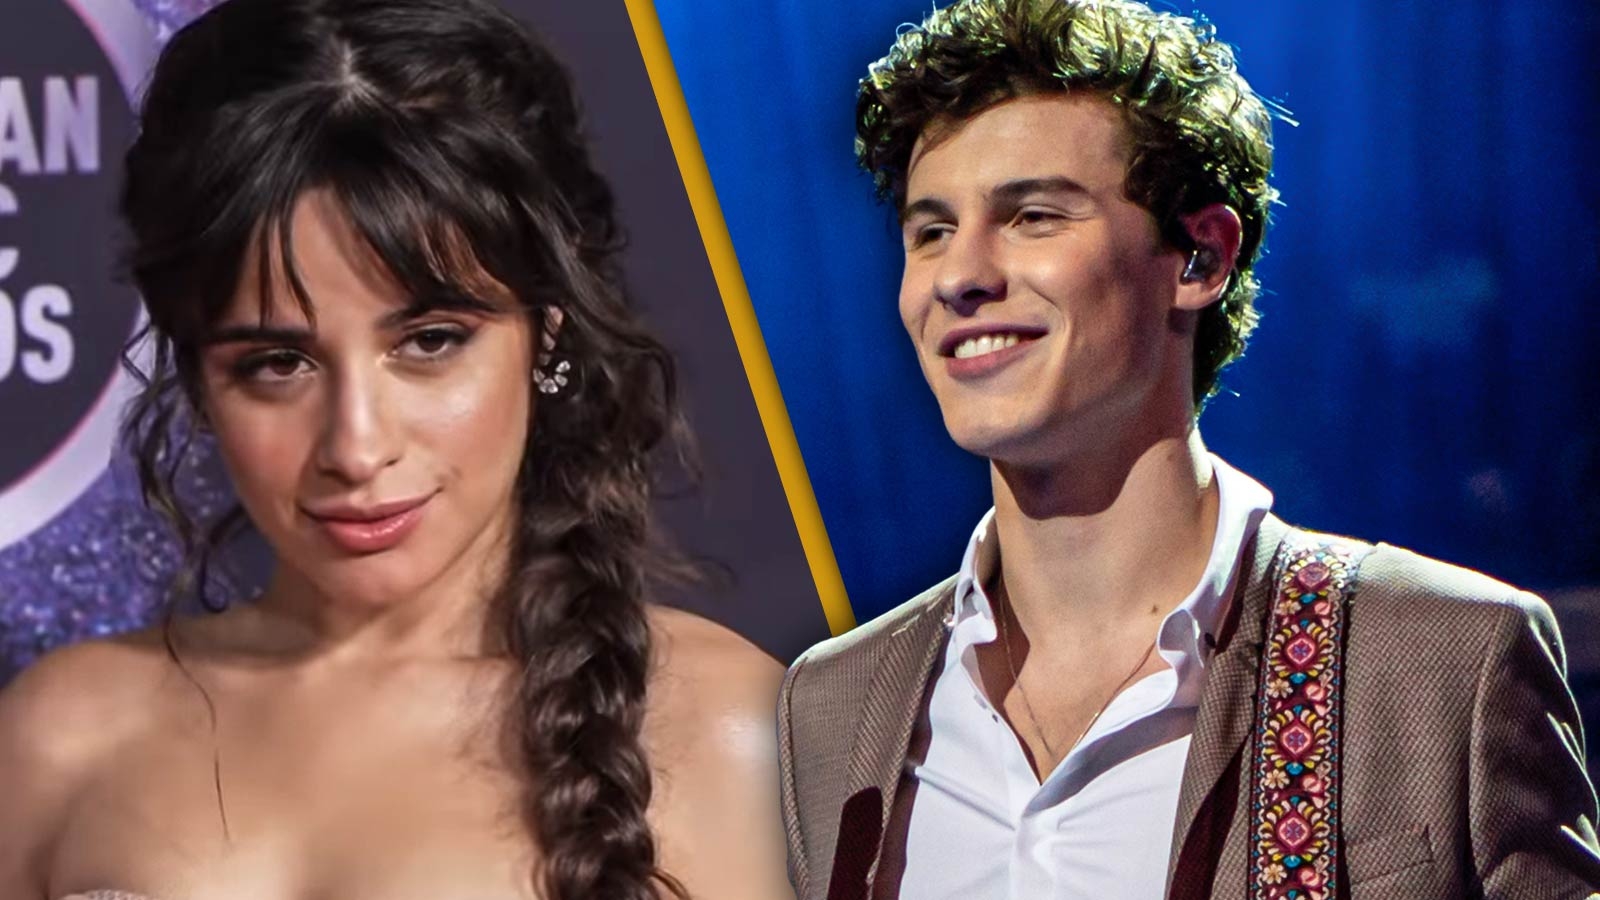 “Let the relationship go”: Camila Cabello and Shawn Mendes’ Recent Linkup Has Fans Worried They May be Following the Path of Another Doomed Celebrity Couple